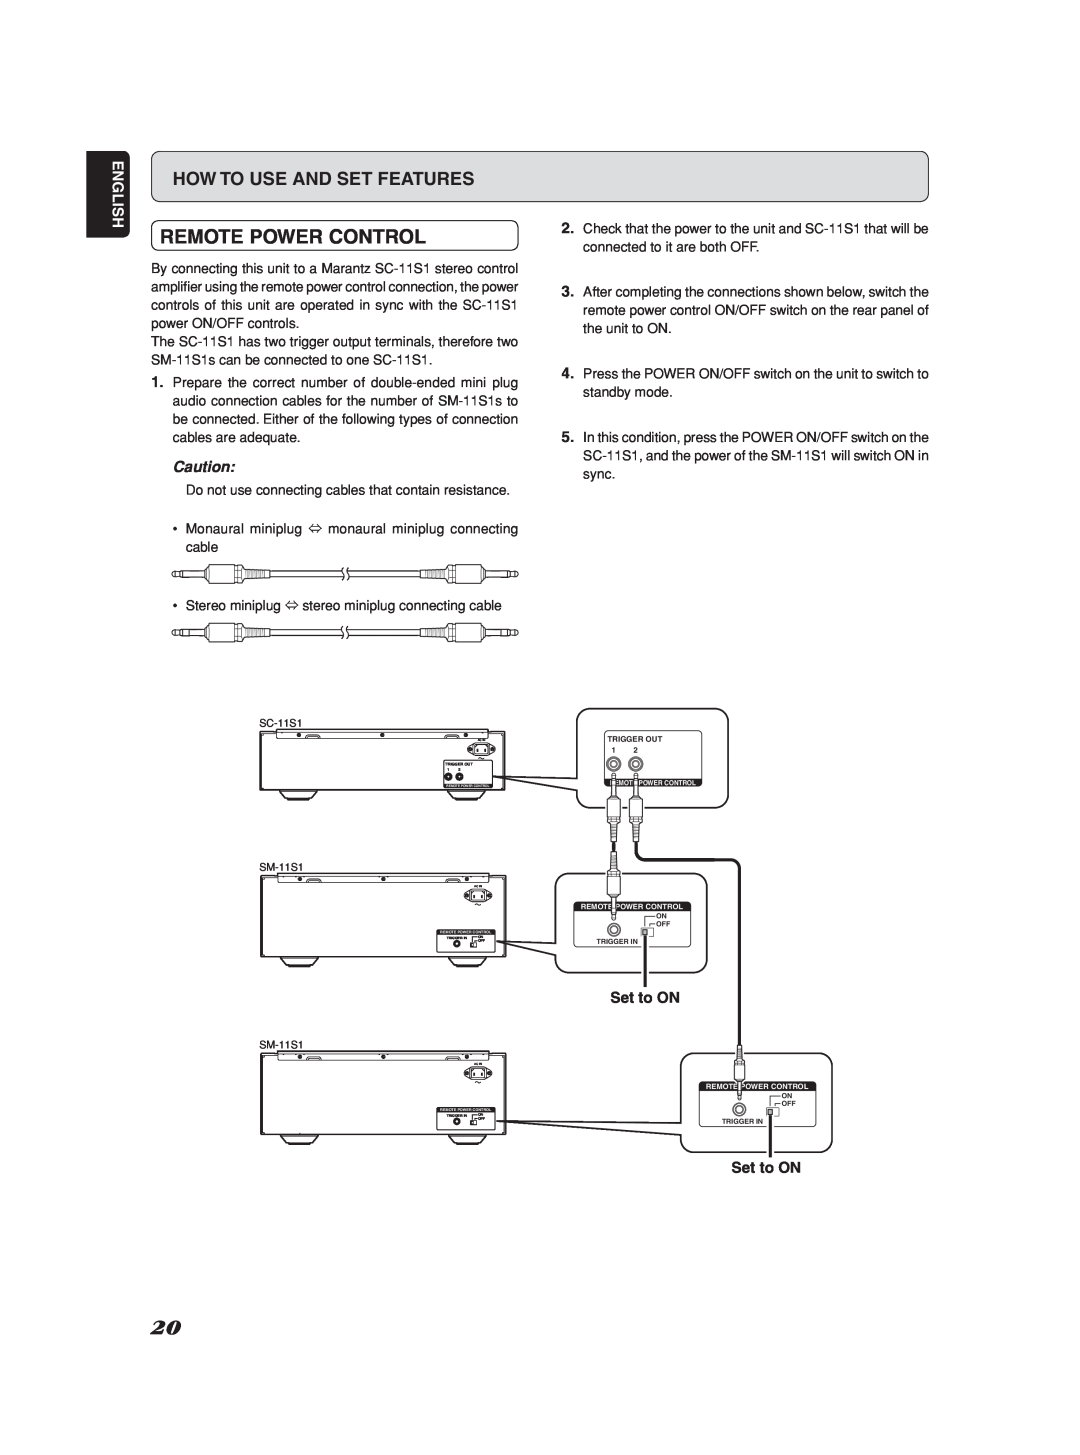 Marantz SM-1151 manual Remote Power Control, How To Use And Set Features 